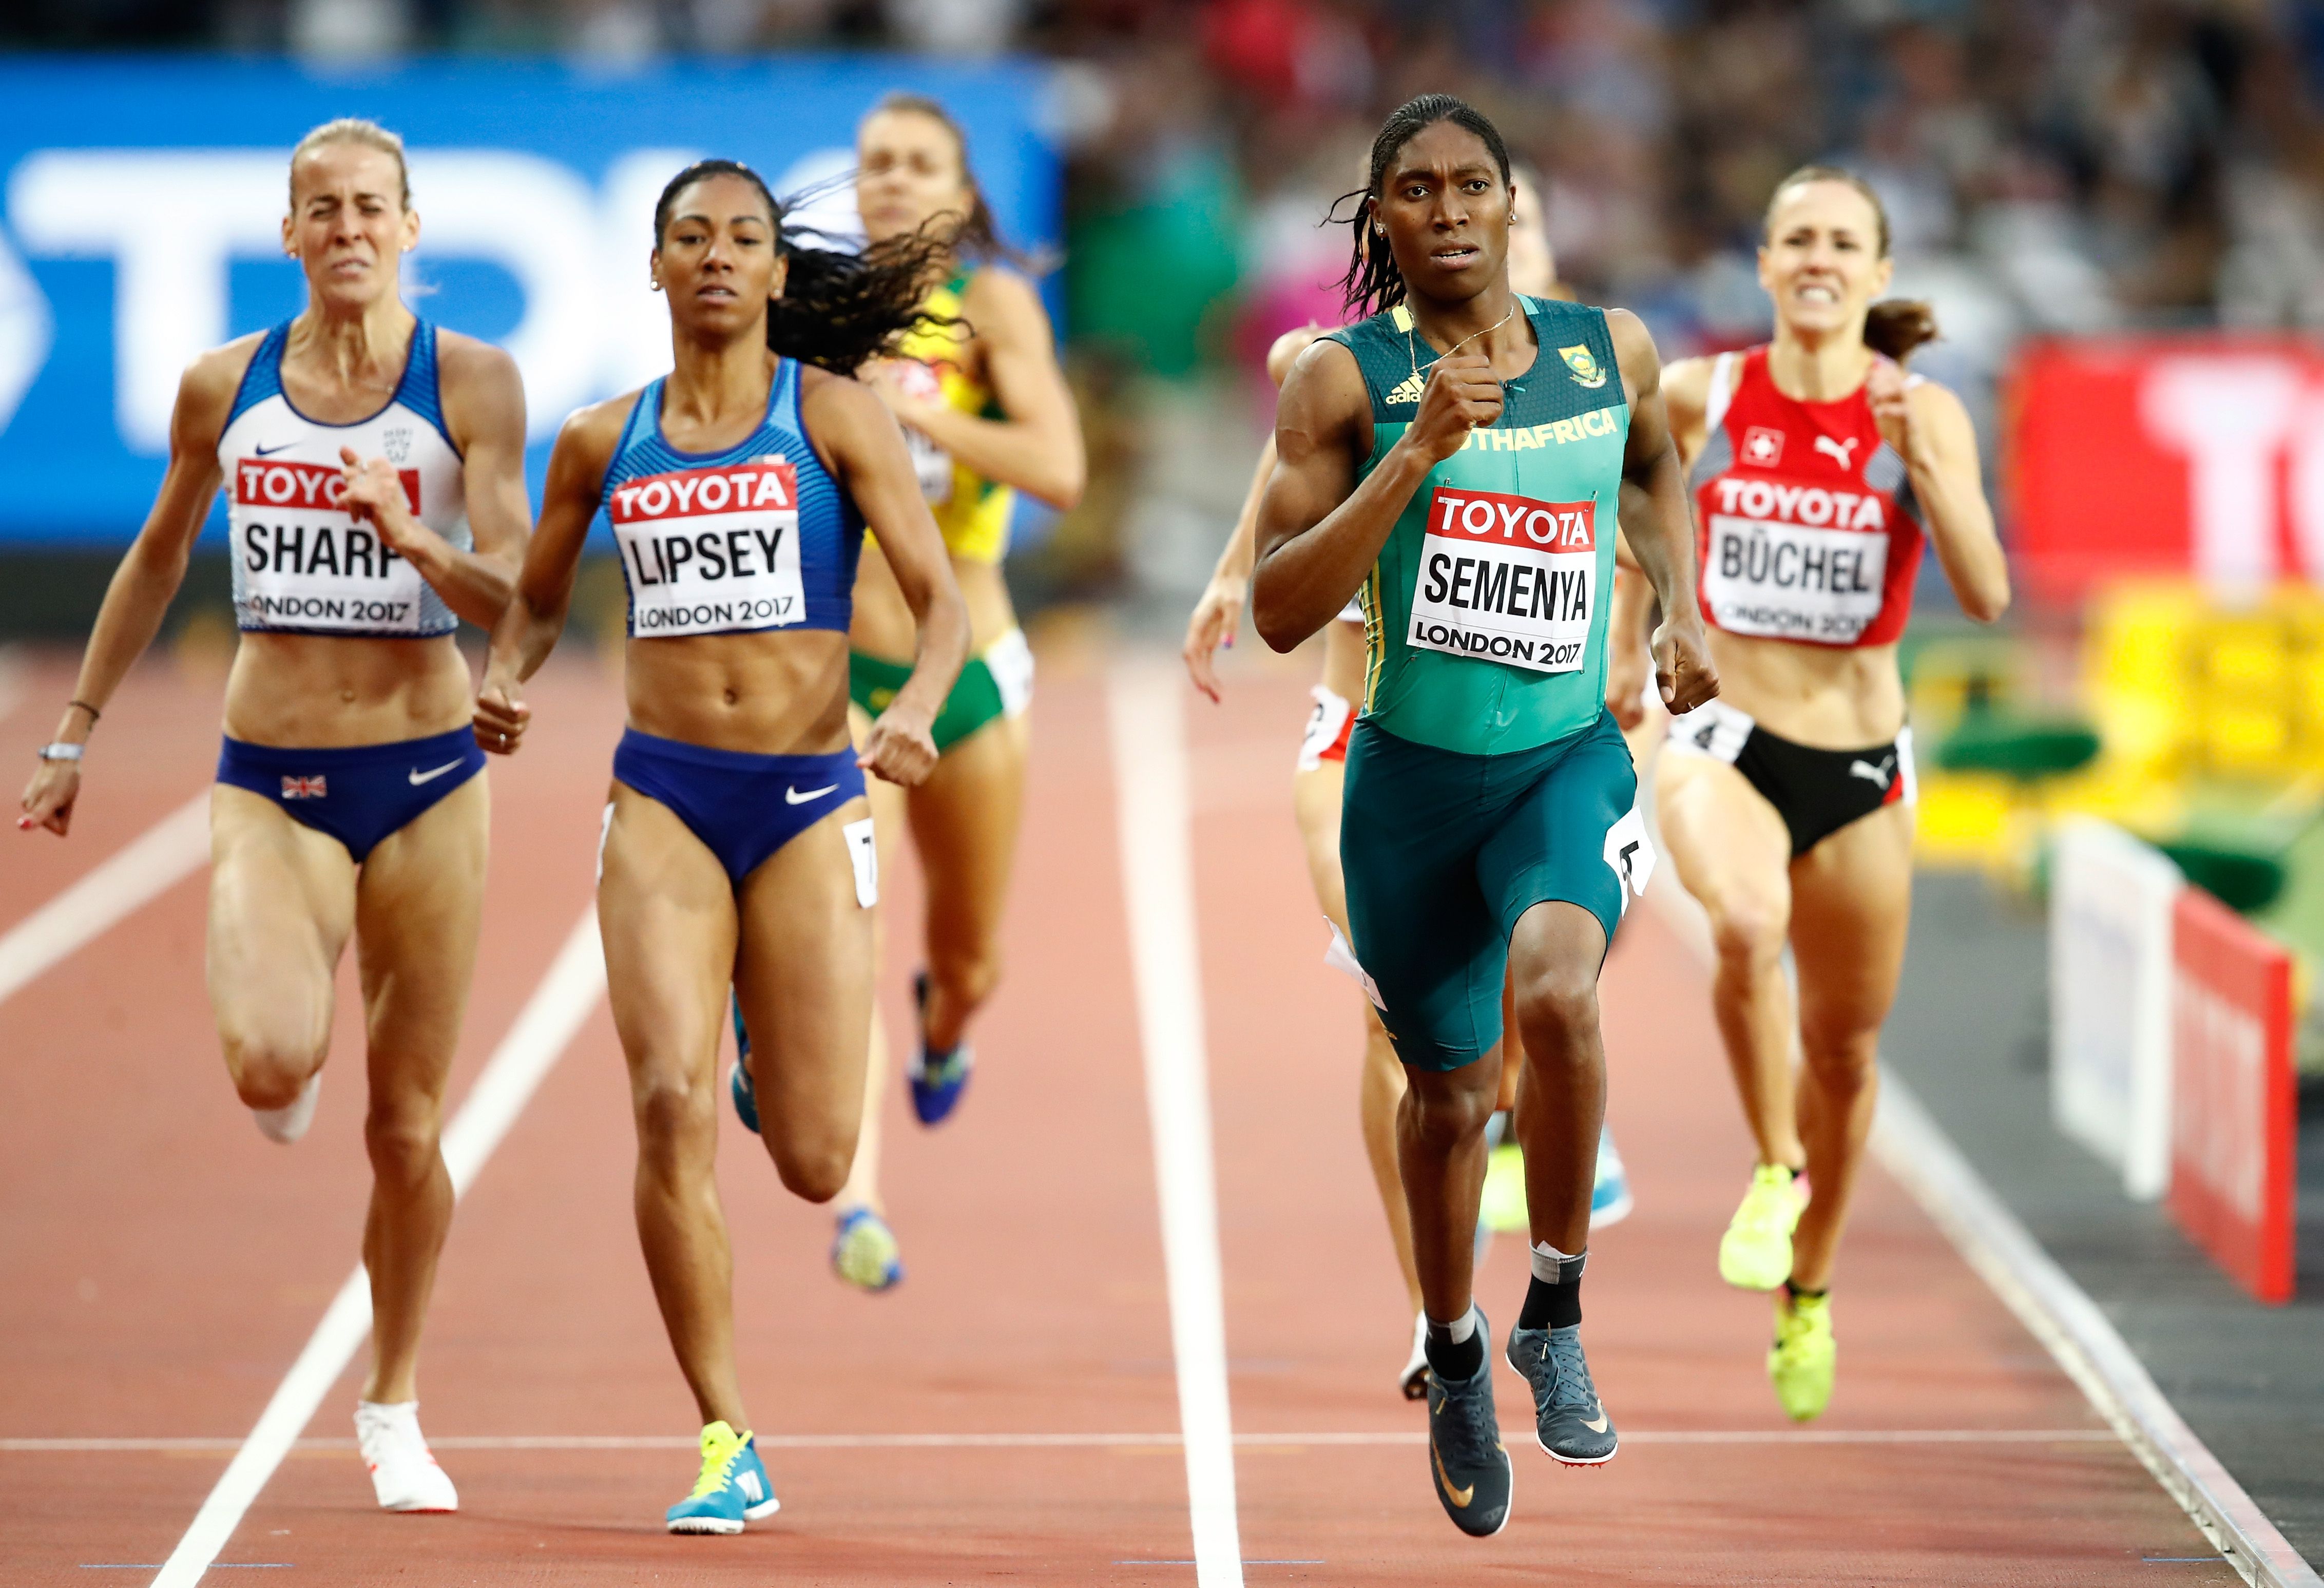 Court Rules Against Caster Semenya in IAAF Testosterone Case pic